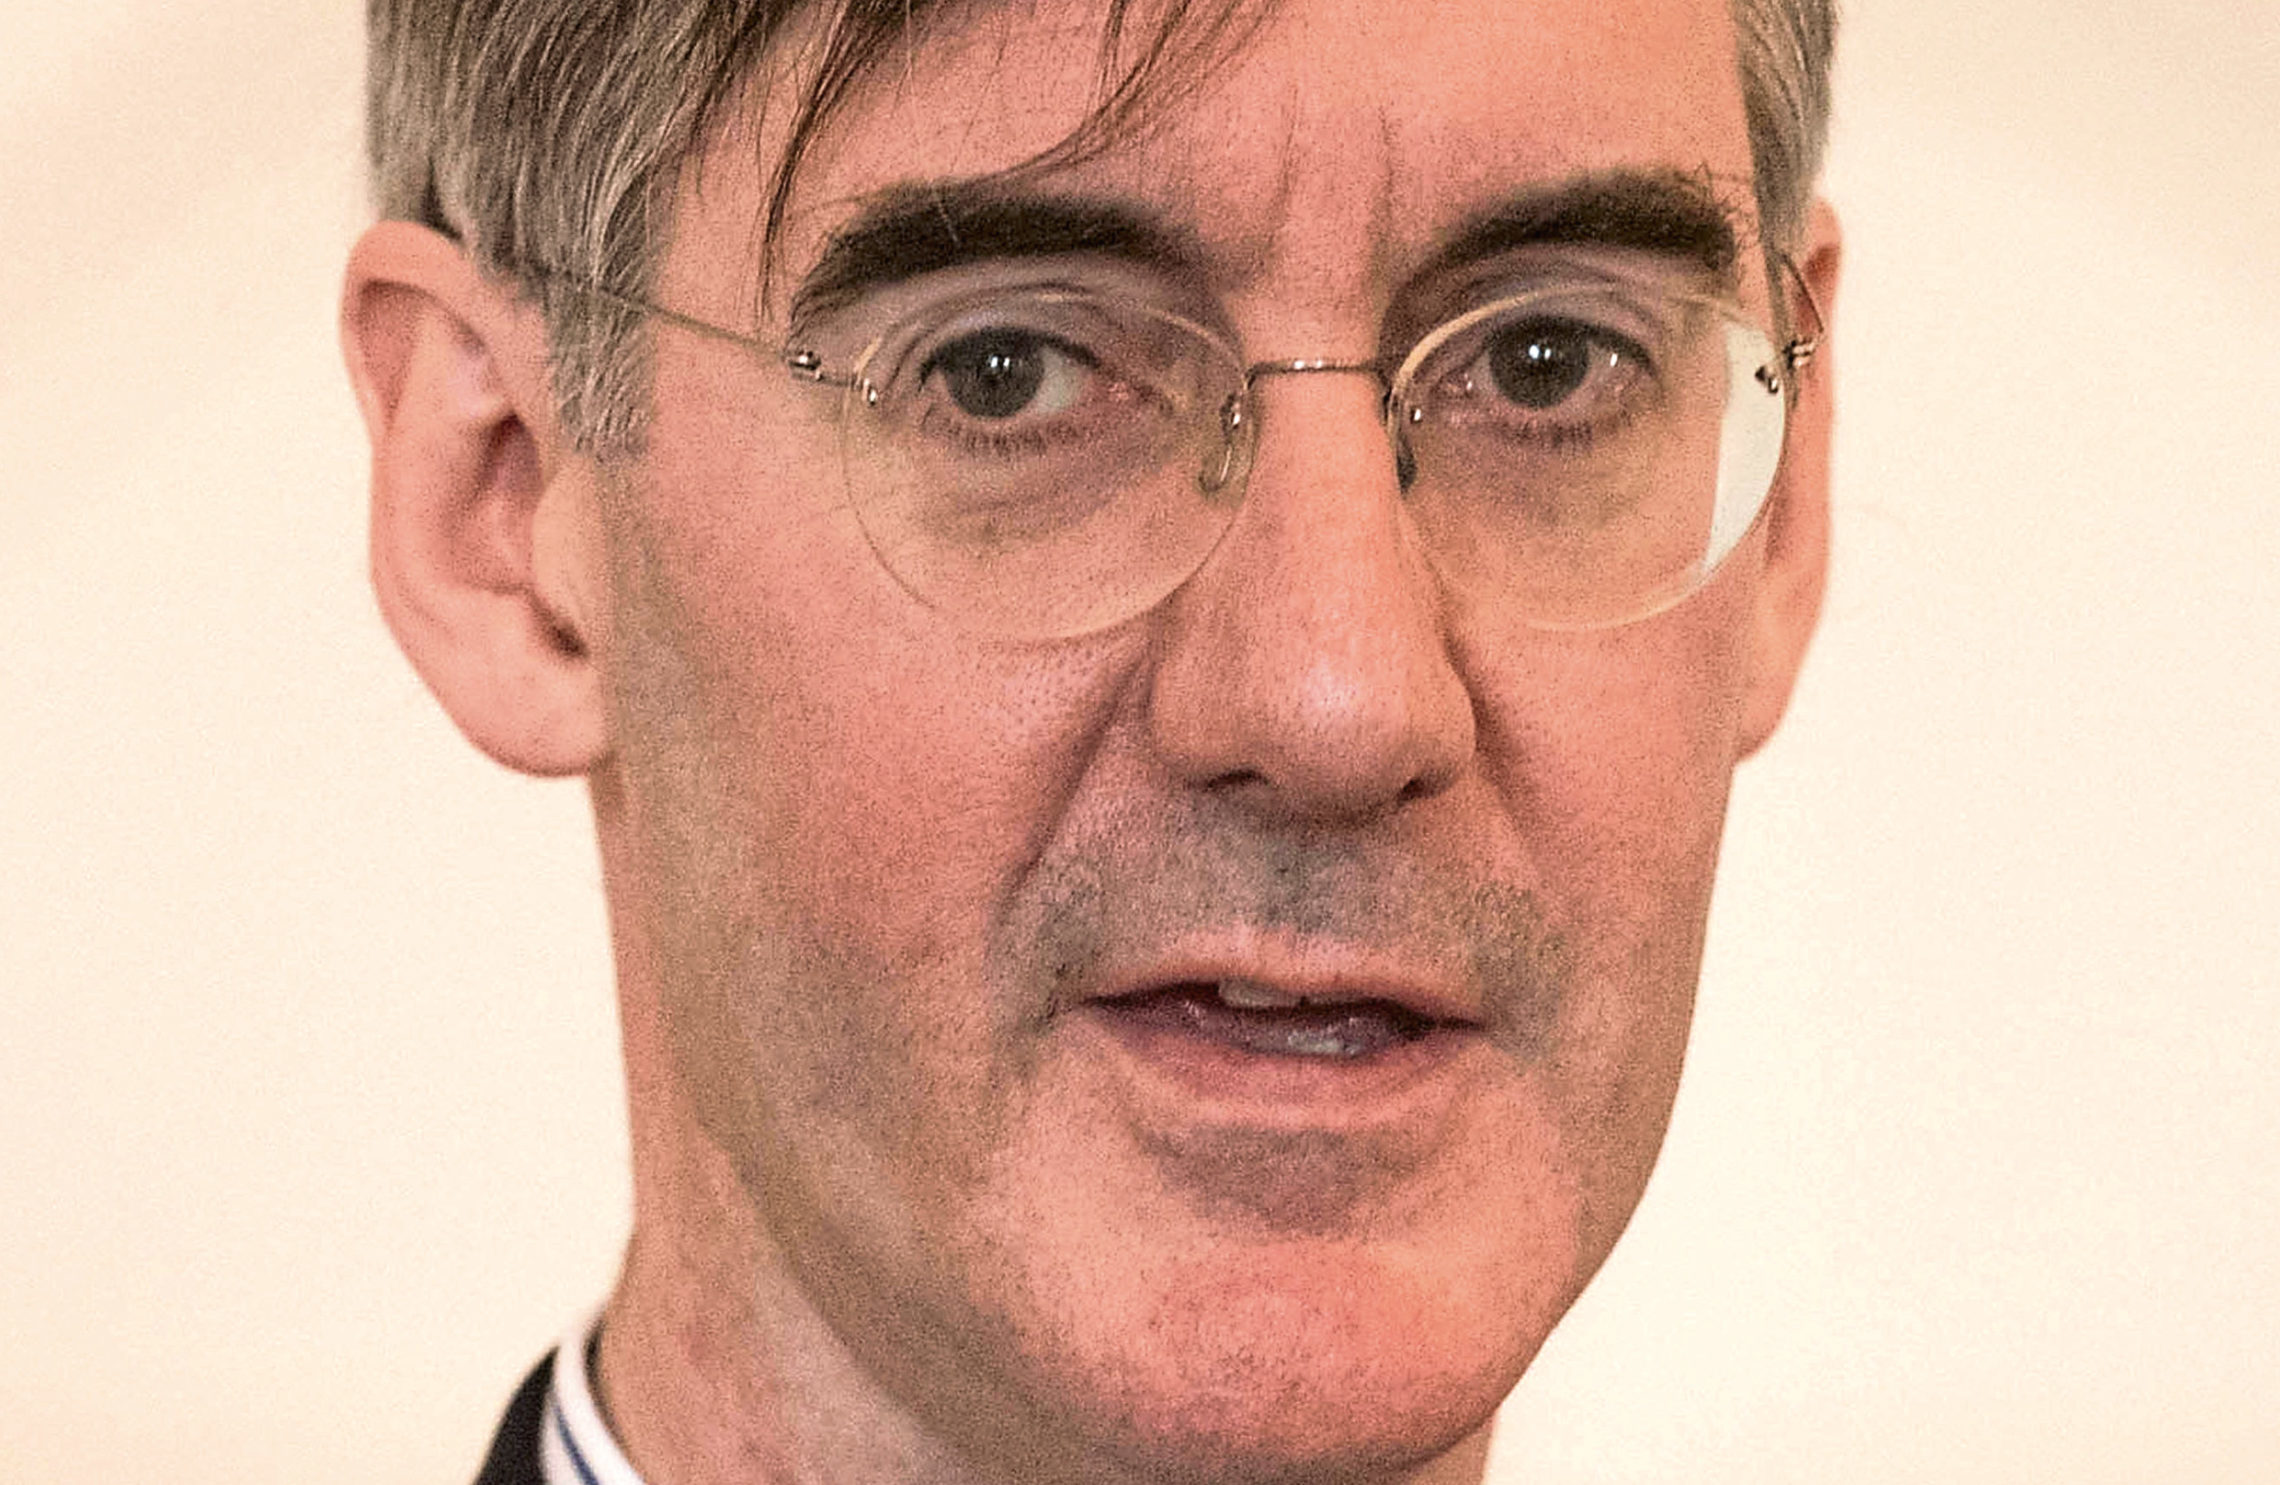 The legislative onslaught on EU law, championed by Jacob Rees-Mogg when he was in government, will scrap workers’ rights such as paid leave and limits on working times.